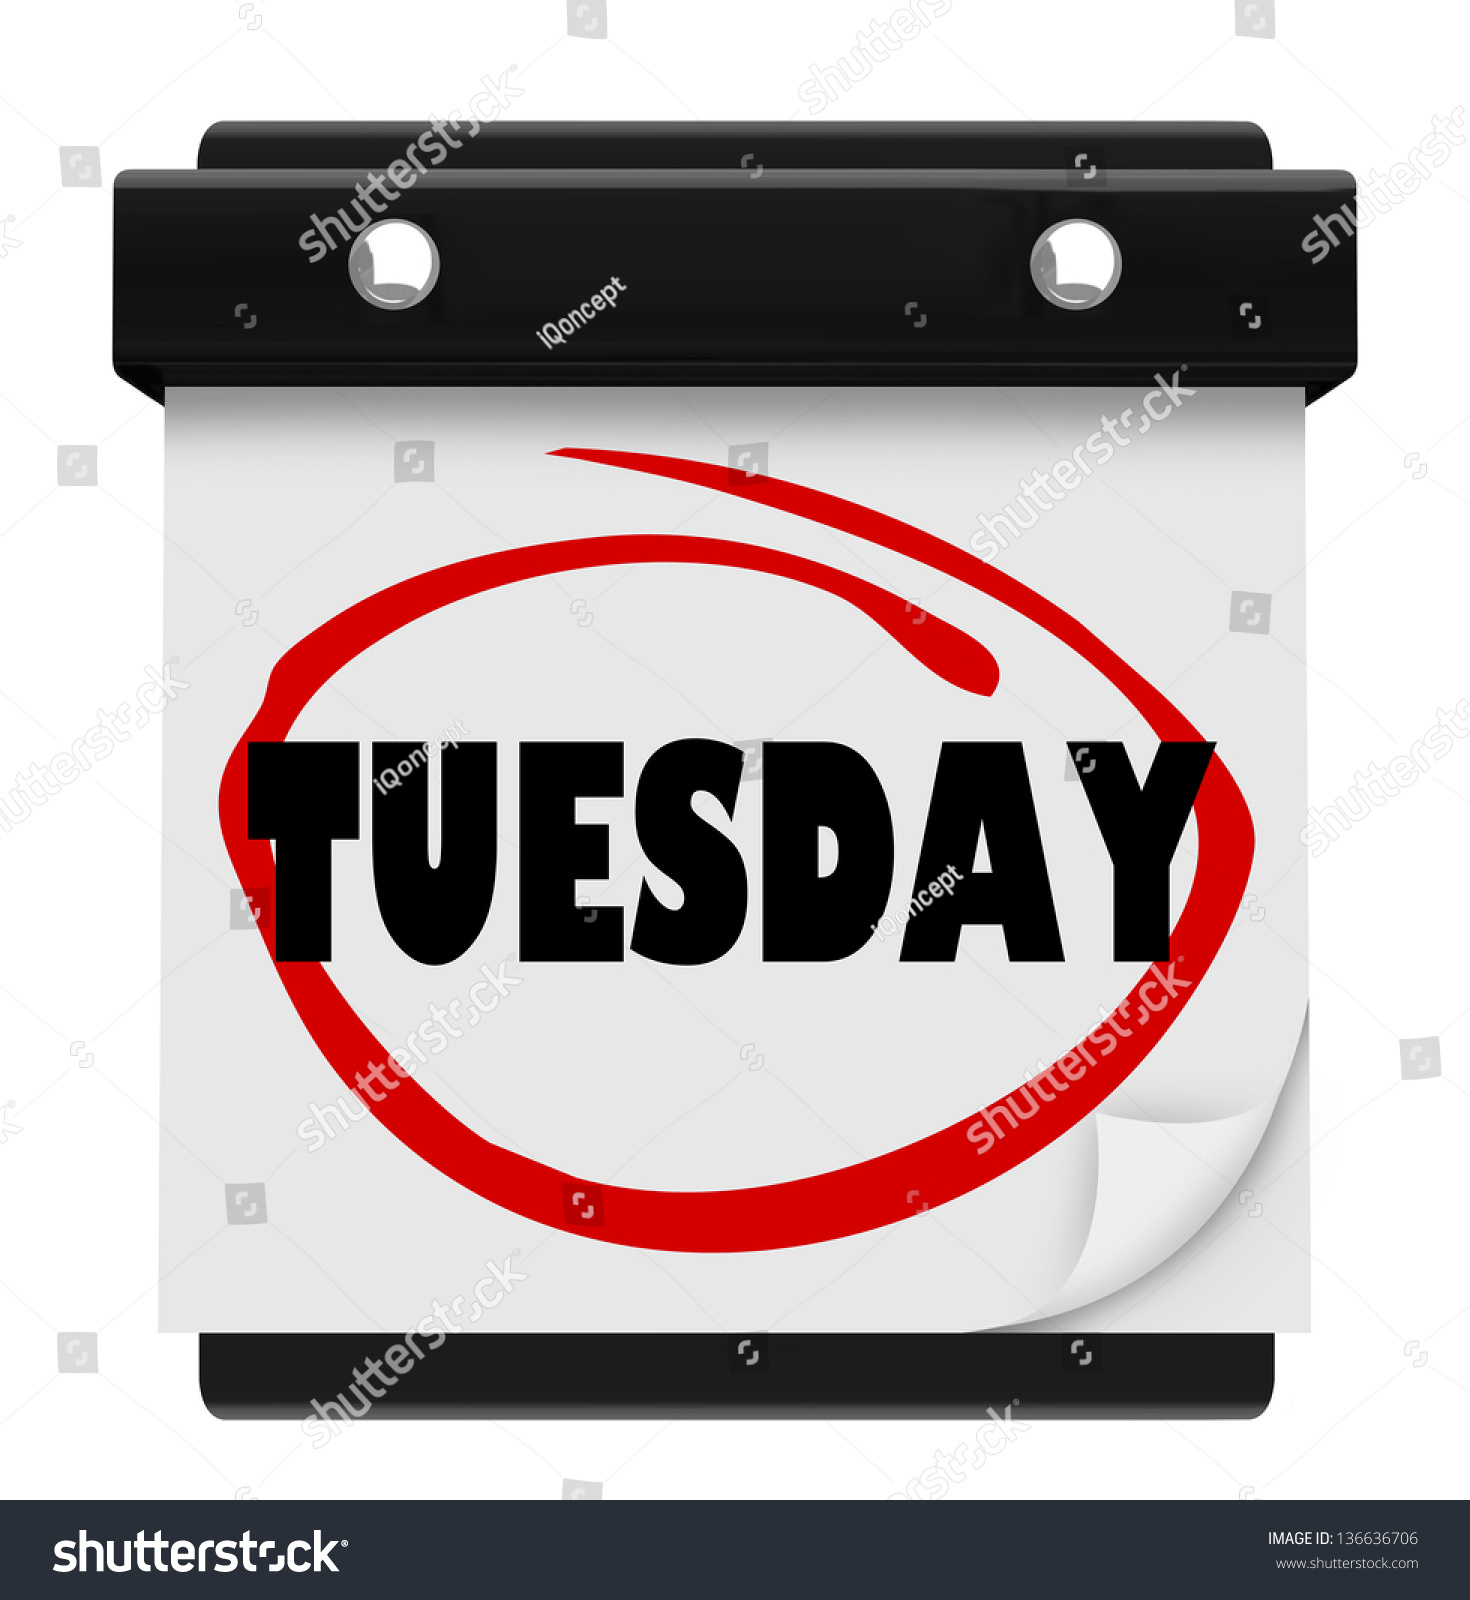 The Word Tuesday Circled On A Small Wall Calendar To Illustrate The Day